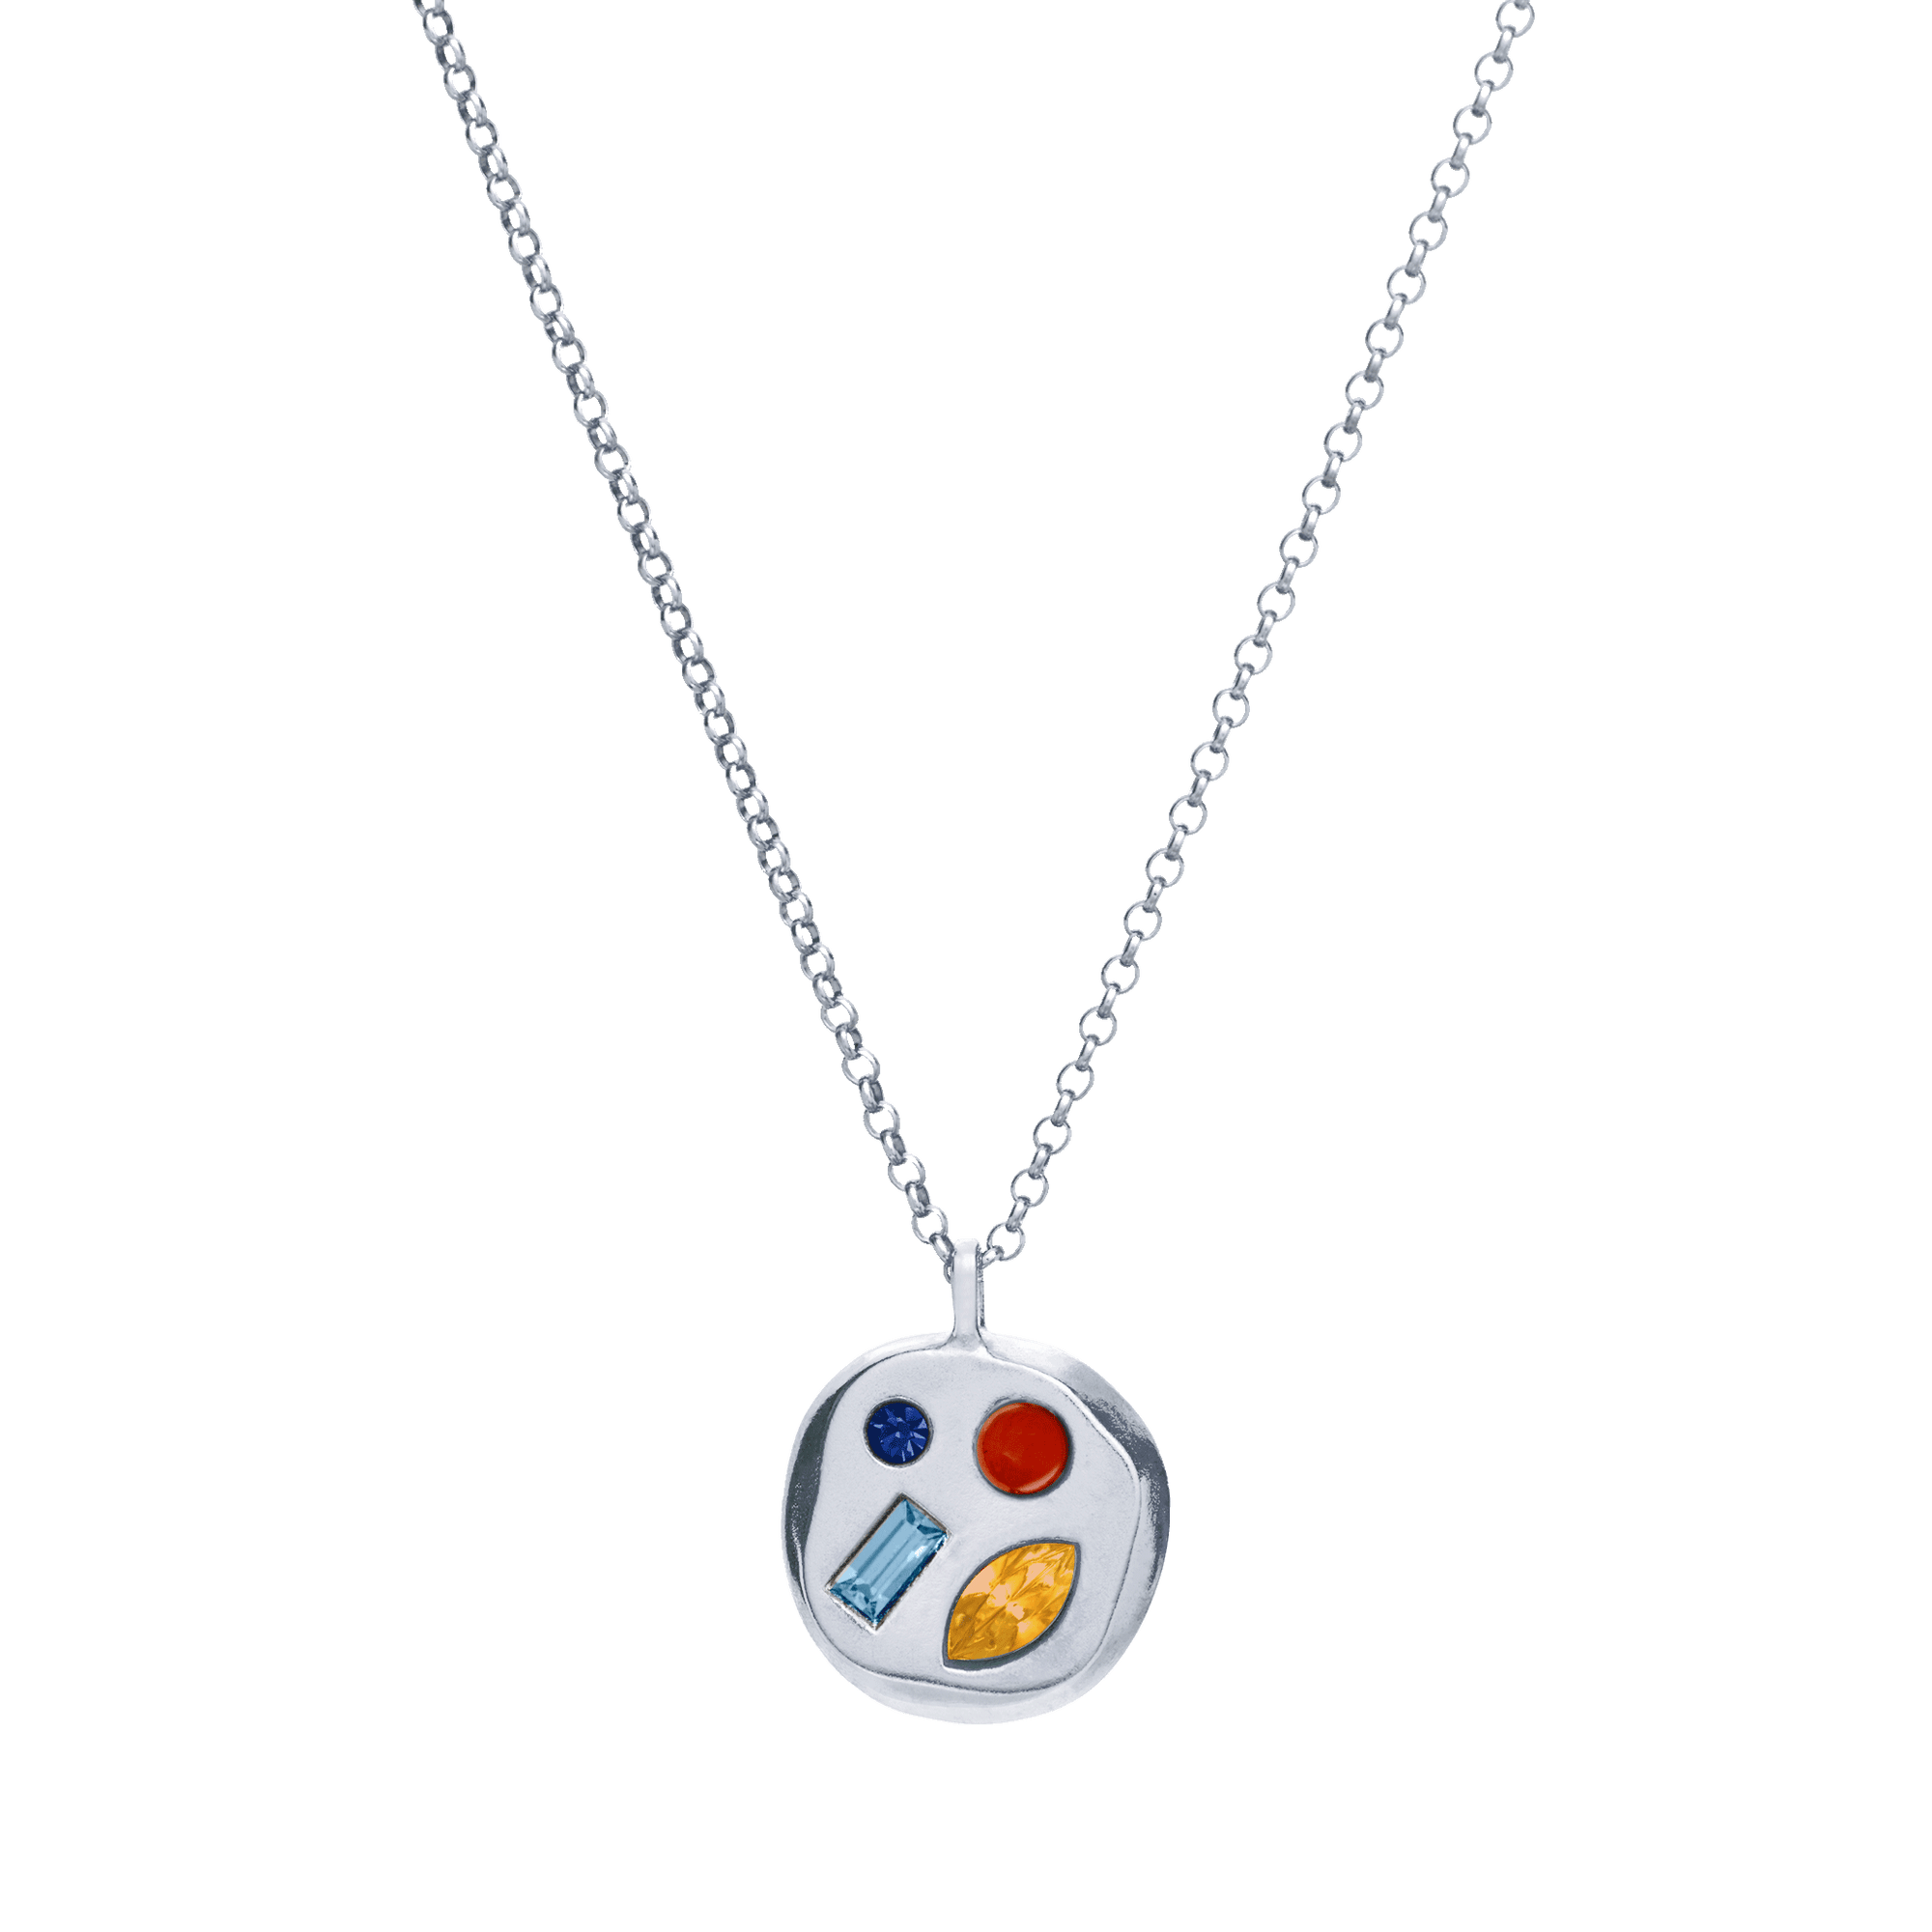 The November Seventeenth Pendant in Sterling Silver